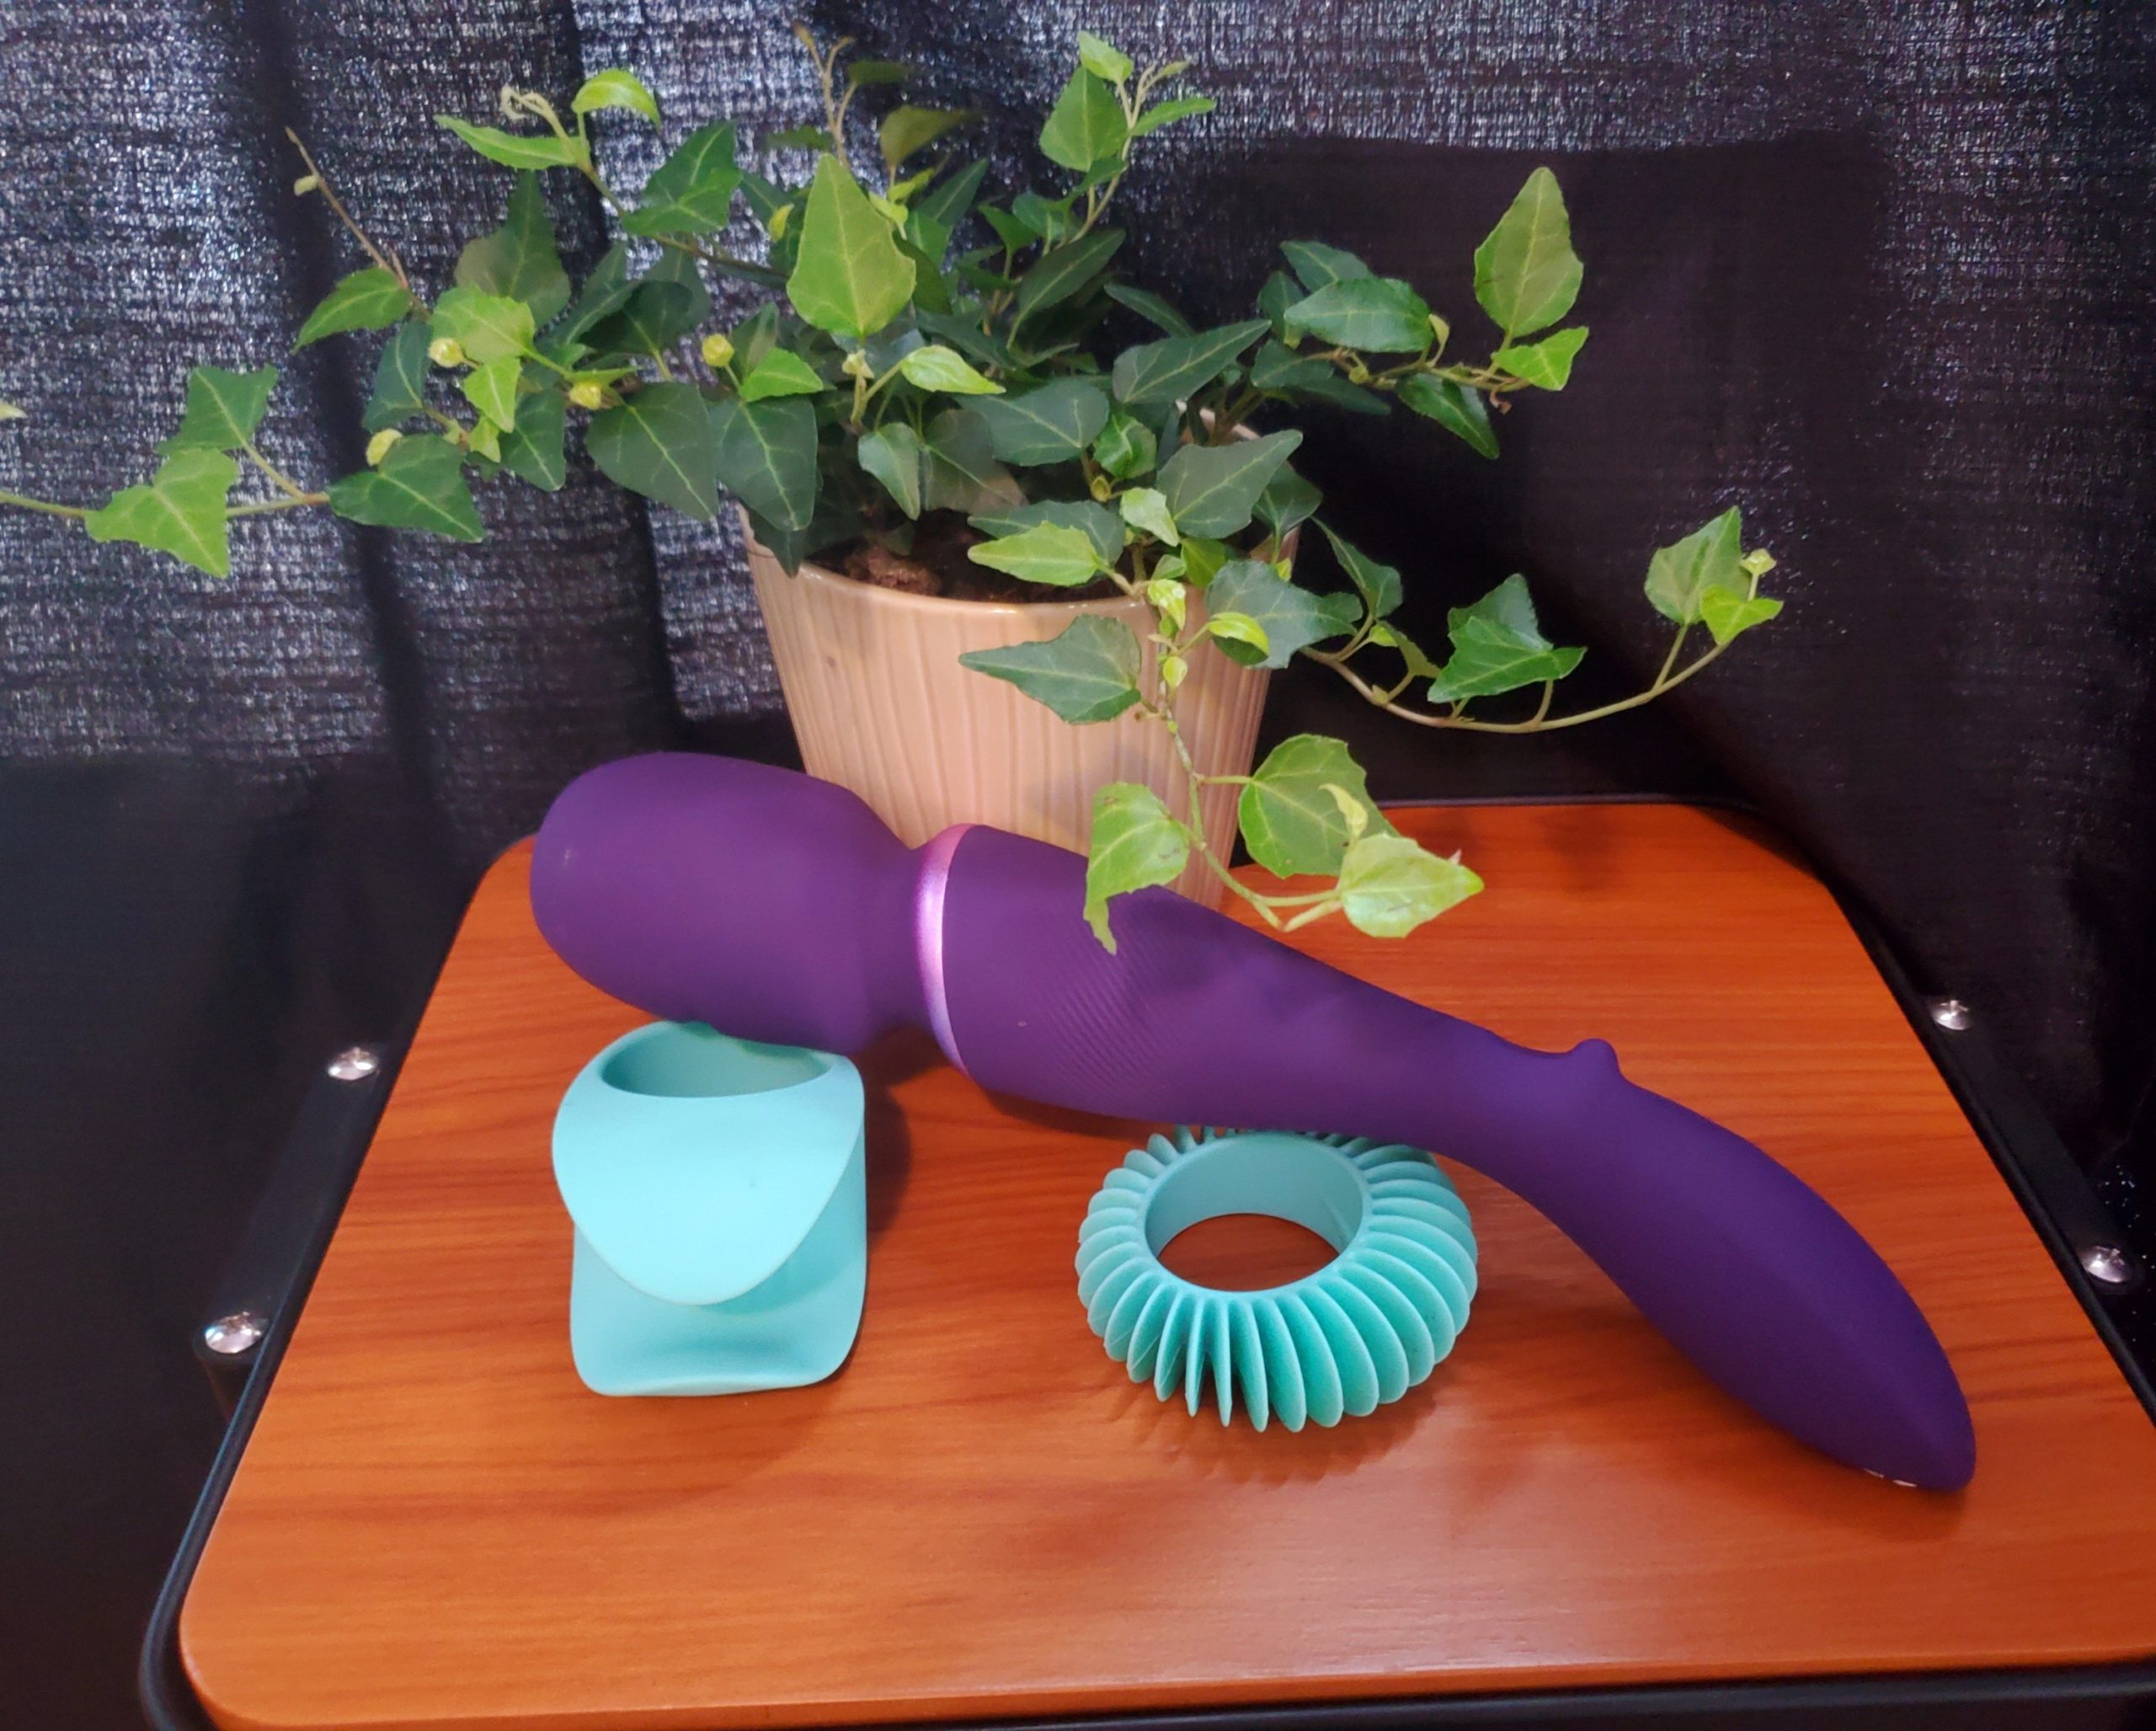 We-Vibe Rechargeable Waterproof Wand Review